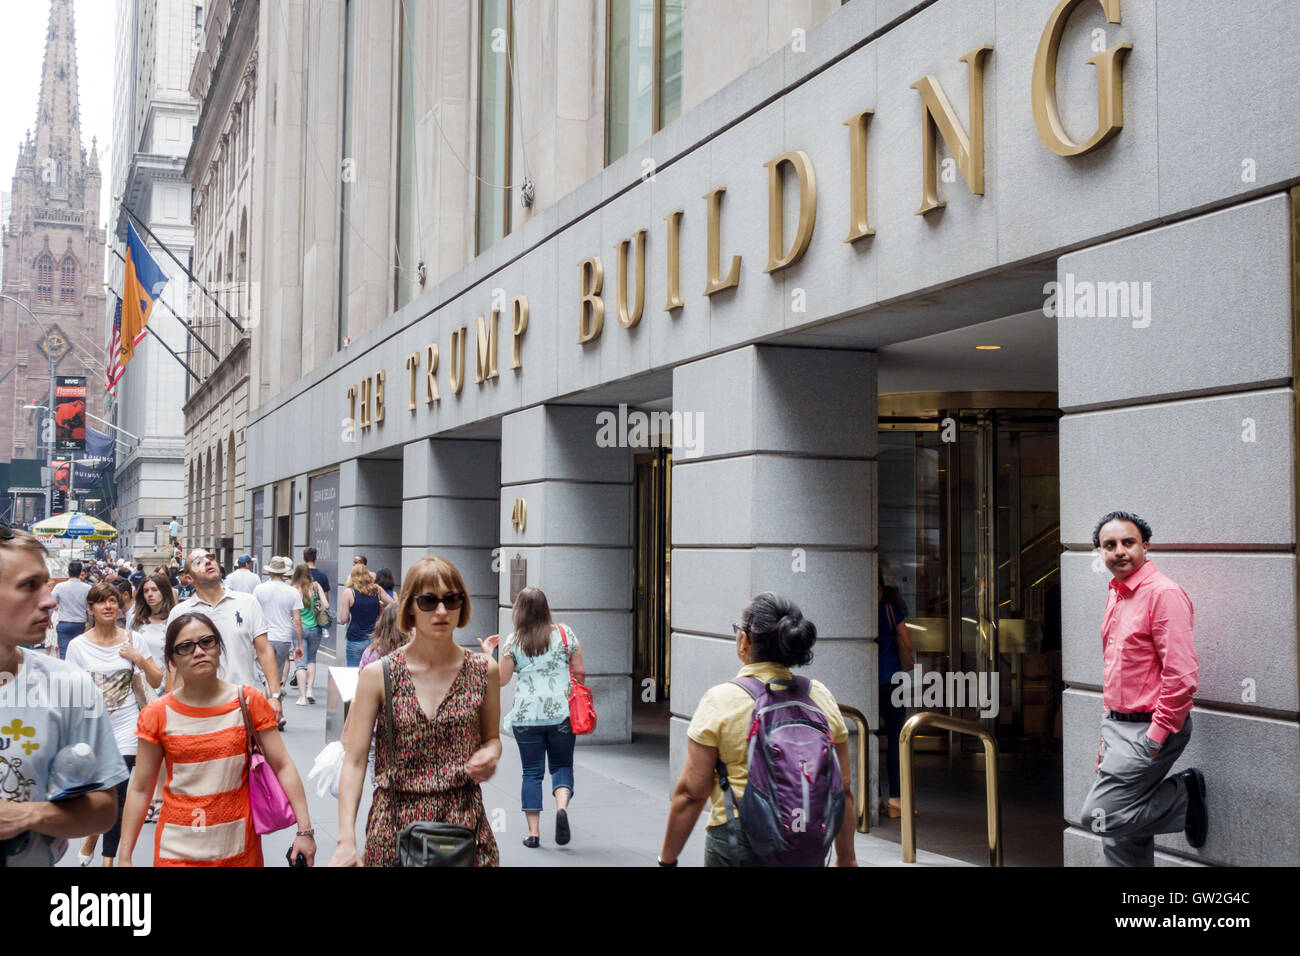 New York City,NY NYC Lower Manhattan,Financial District,Wall Street,Trump building,esterno,cartello,adulti asiatici,donne donne donne,uomini maschi,NY Foto Stock